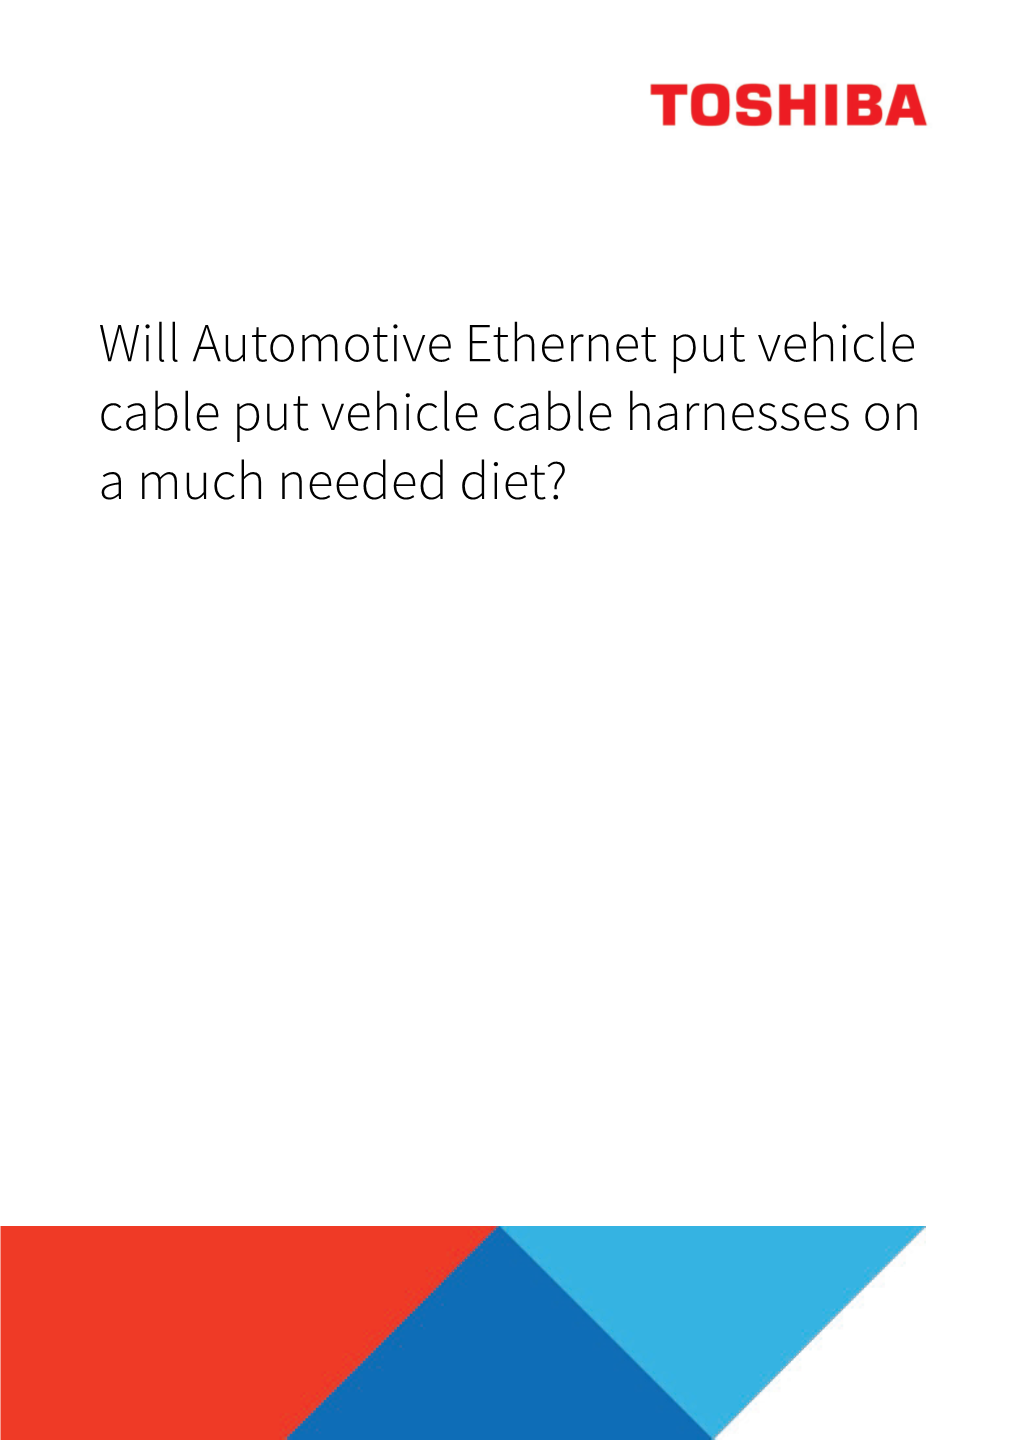 Will Automotive Ethernet Put Vehicle Cable Put Vehicle Cable Harnesses on a Much Needed Diet? Whitepaper